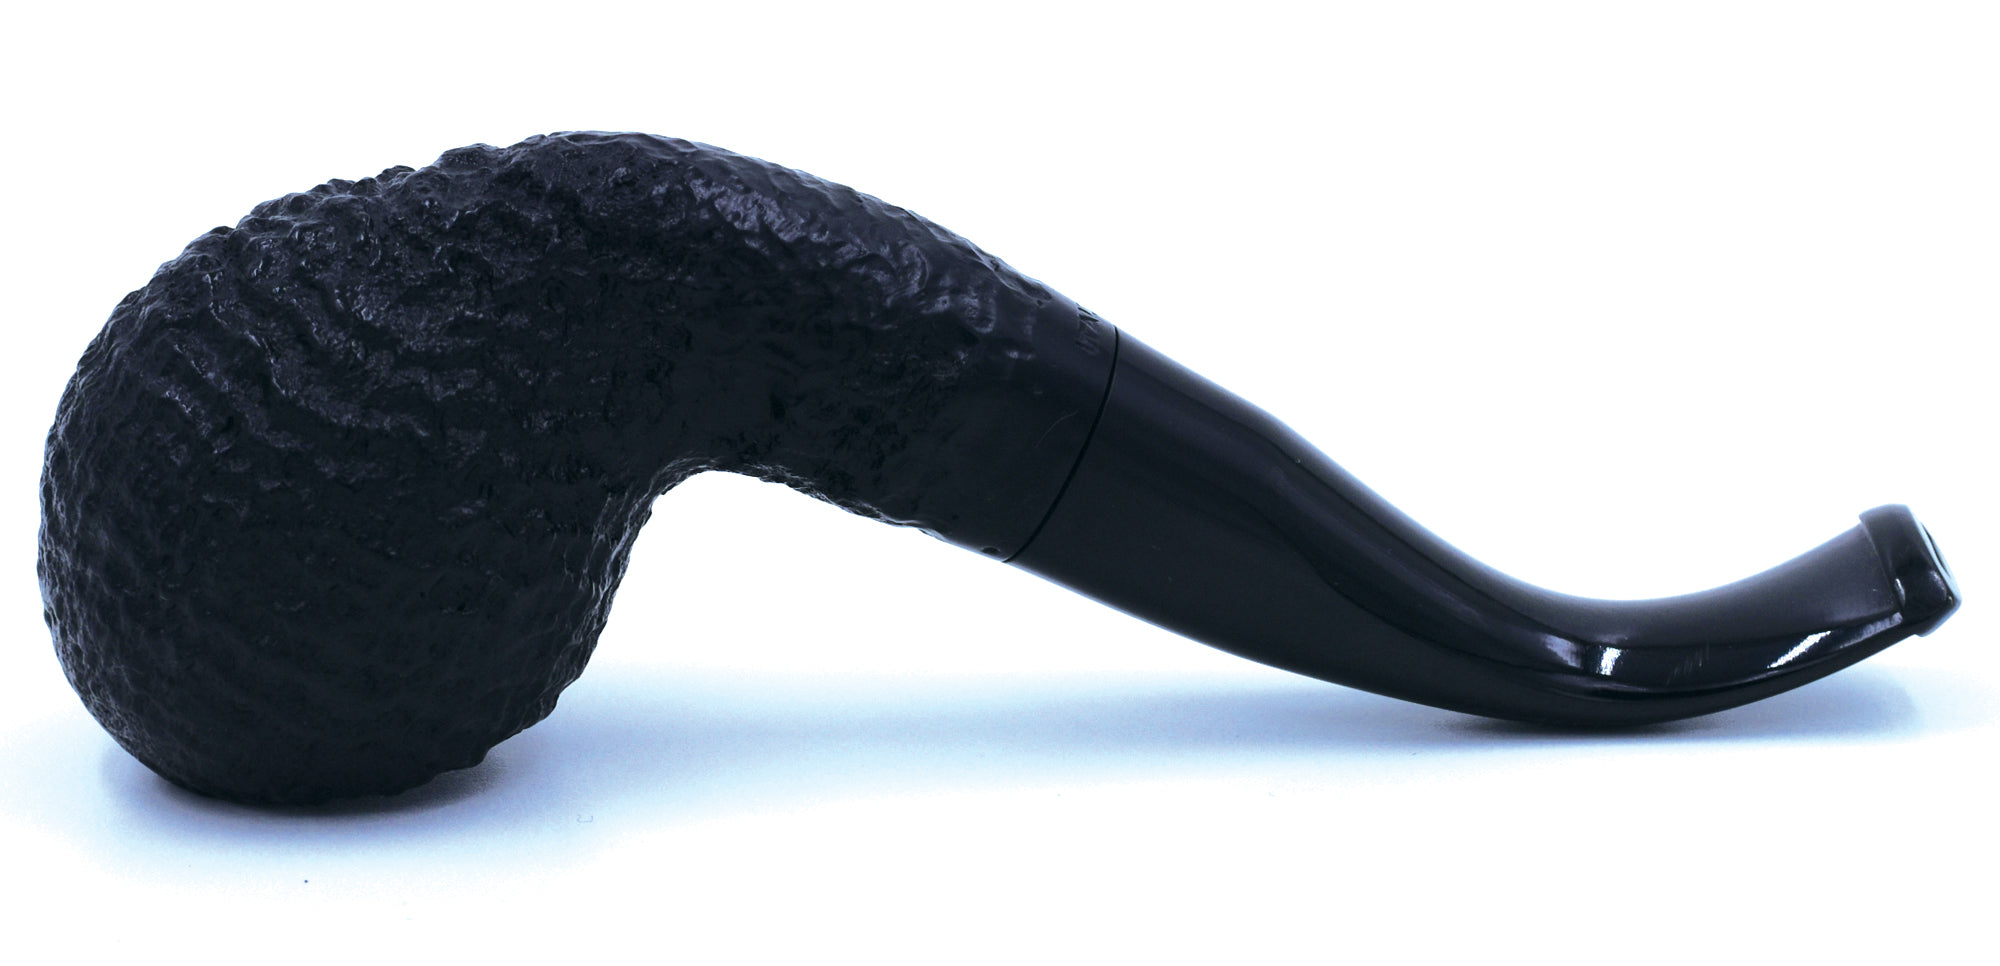 LEGENDEX® PAGANINI* 9 MM Filtered Briar Smoking Pipe Made In Italy 01-08-323